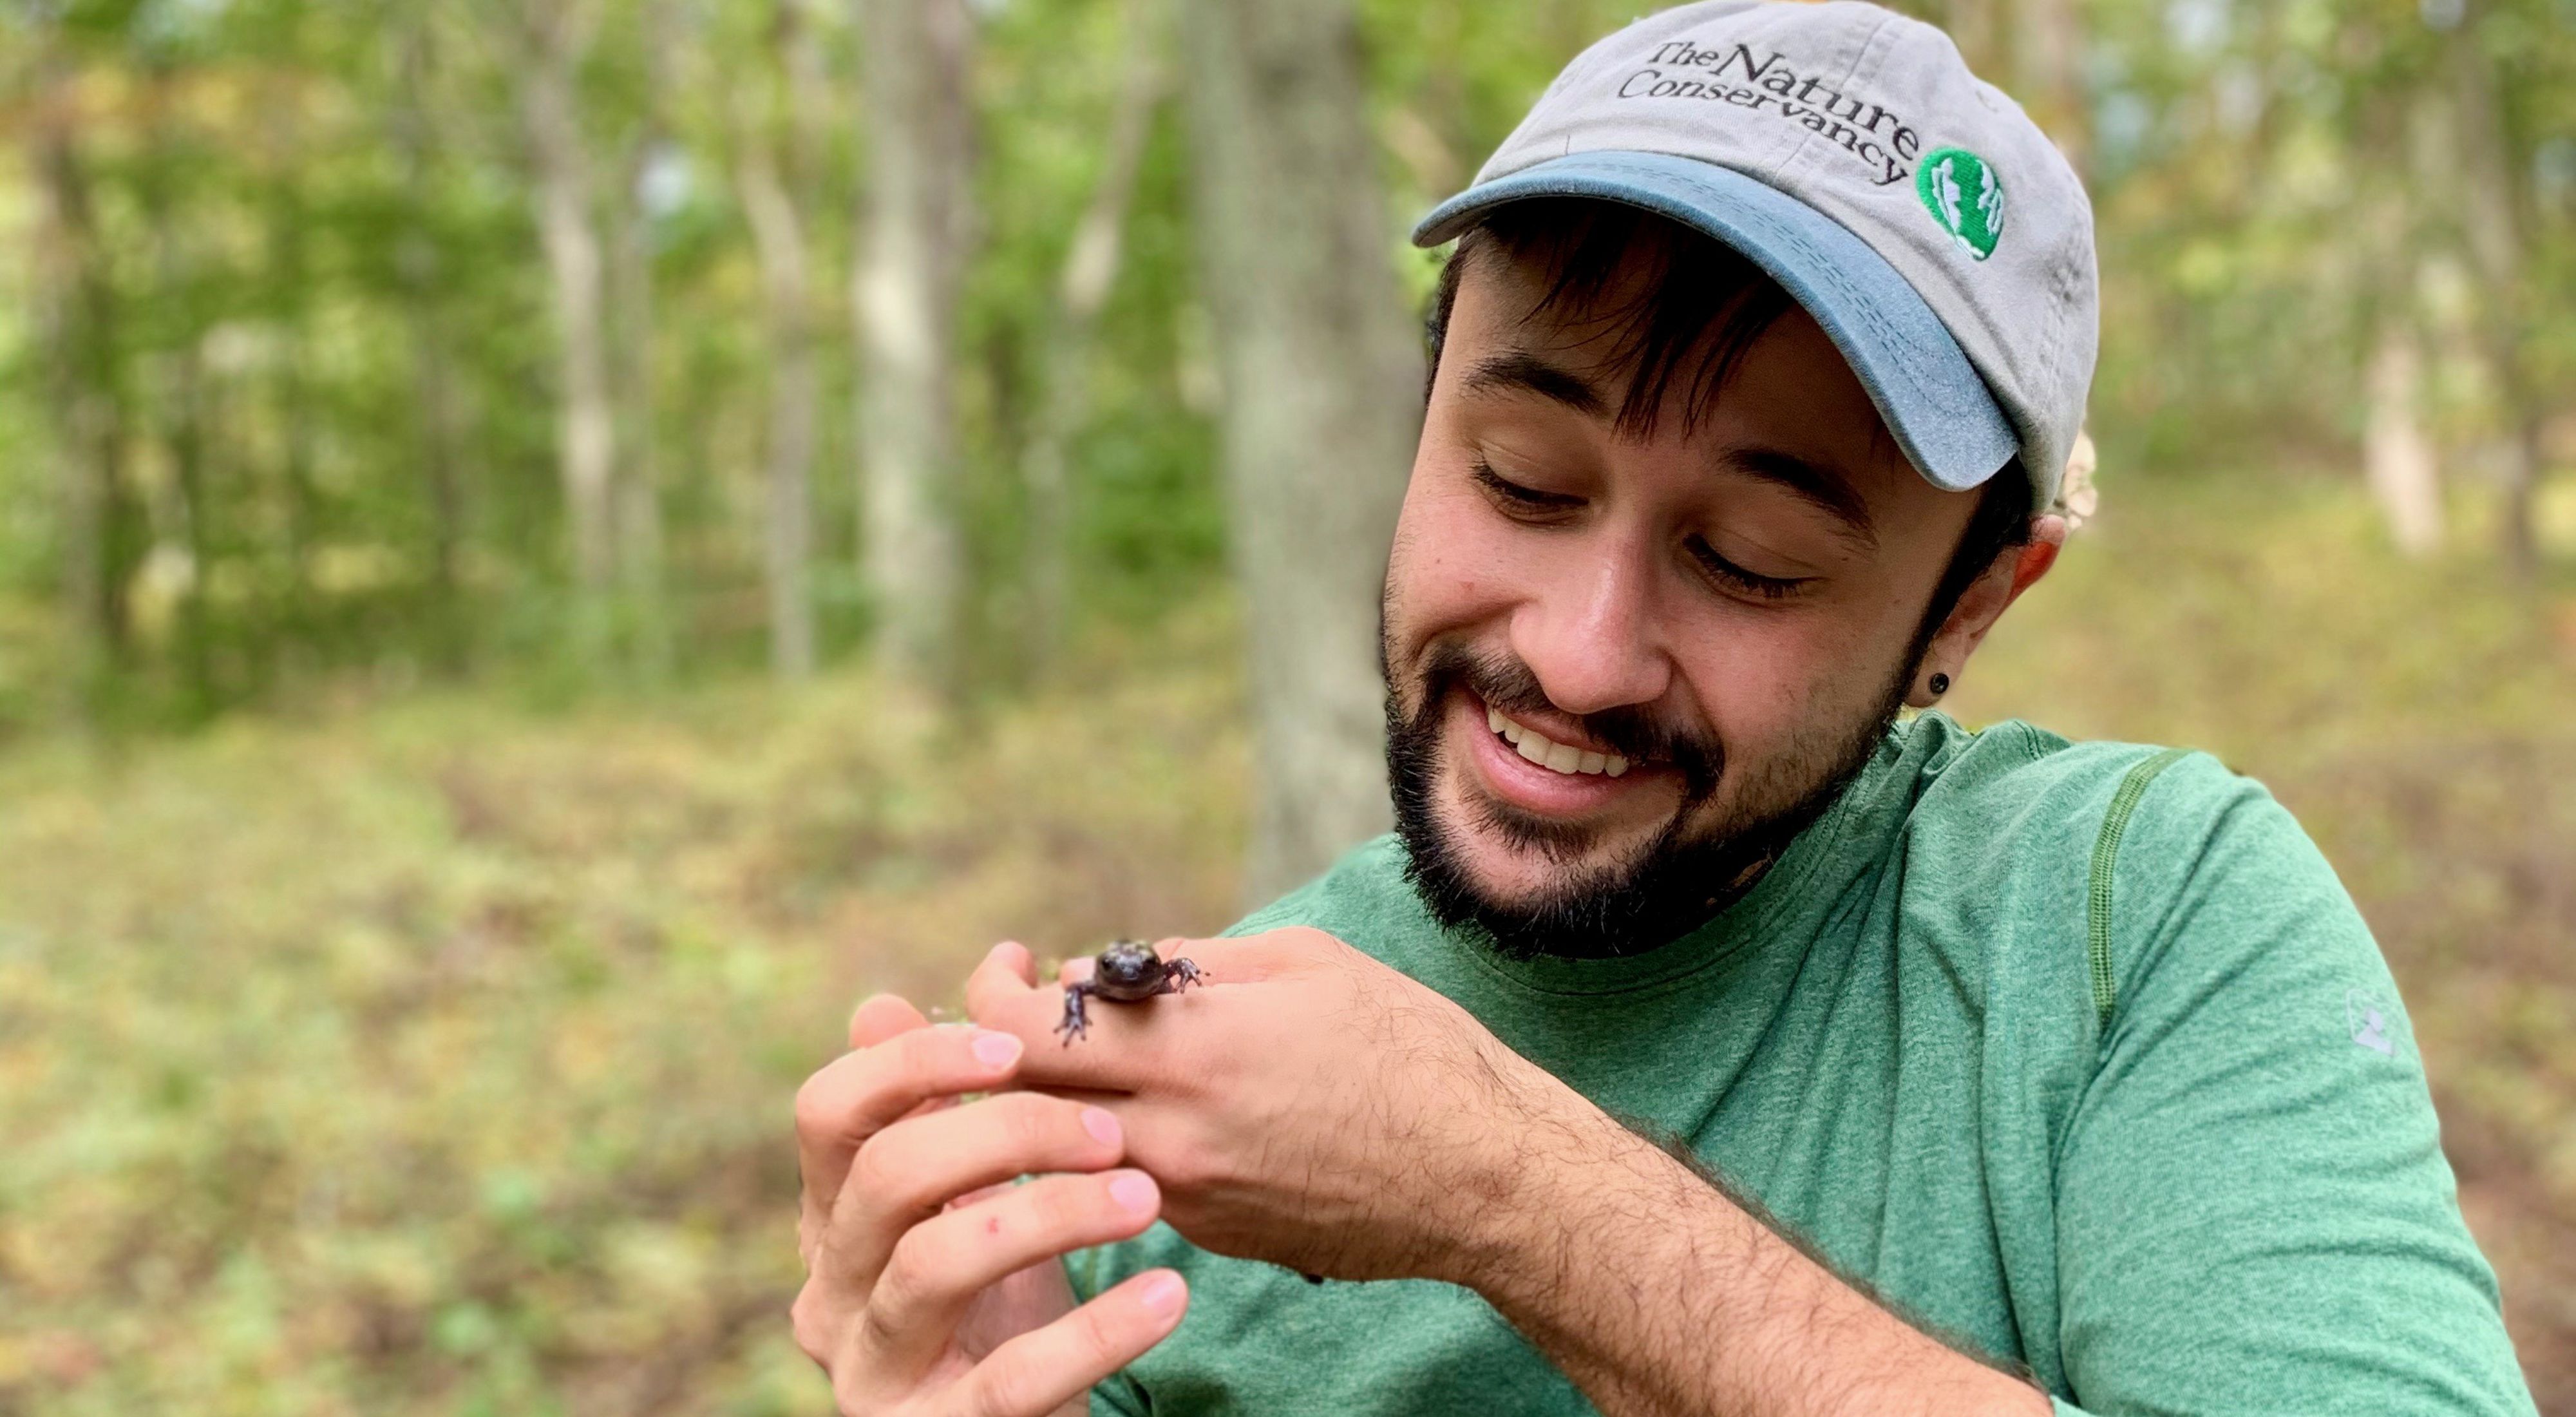 A person wearing a "The Nature Conservancy" baseball cap on the right smiling and looking at a salamander they are holding.